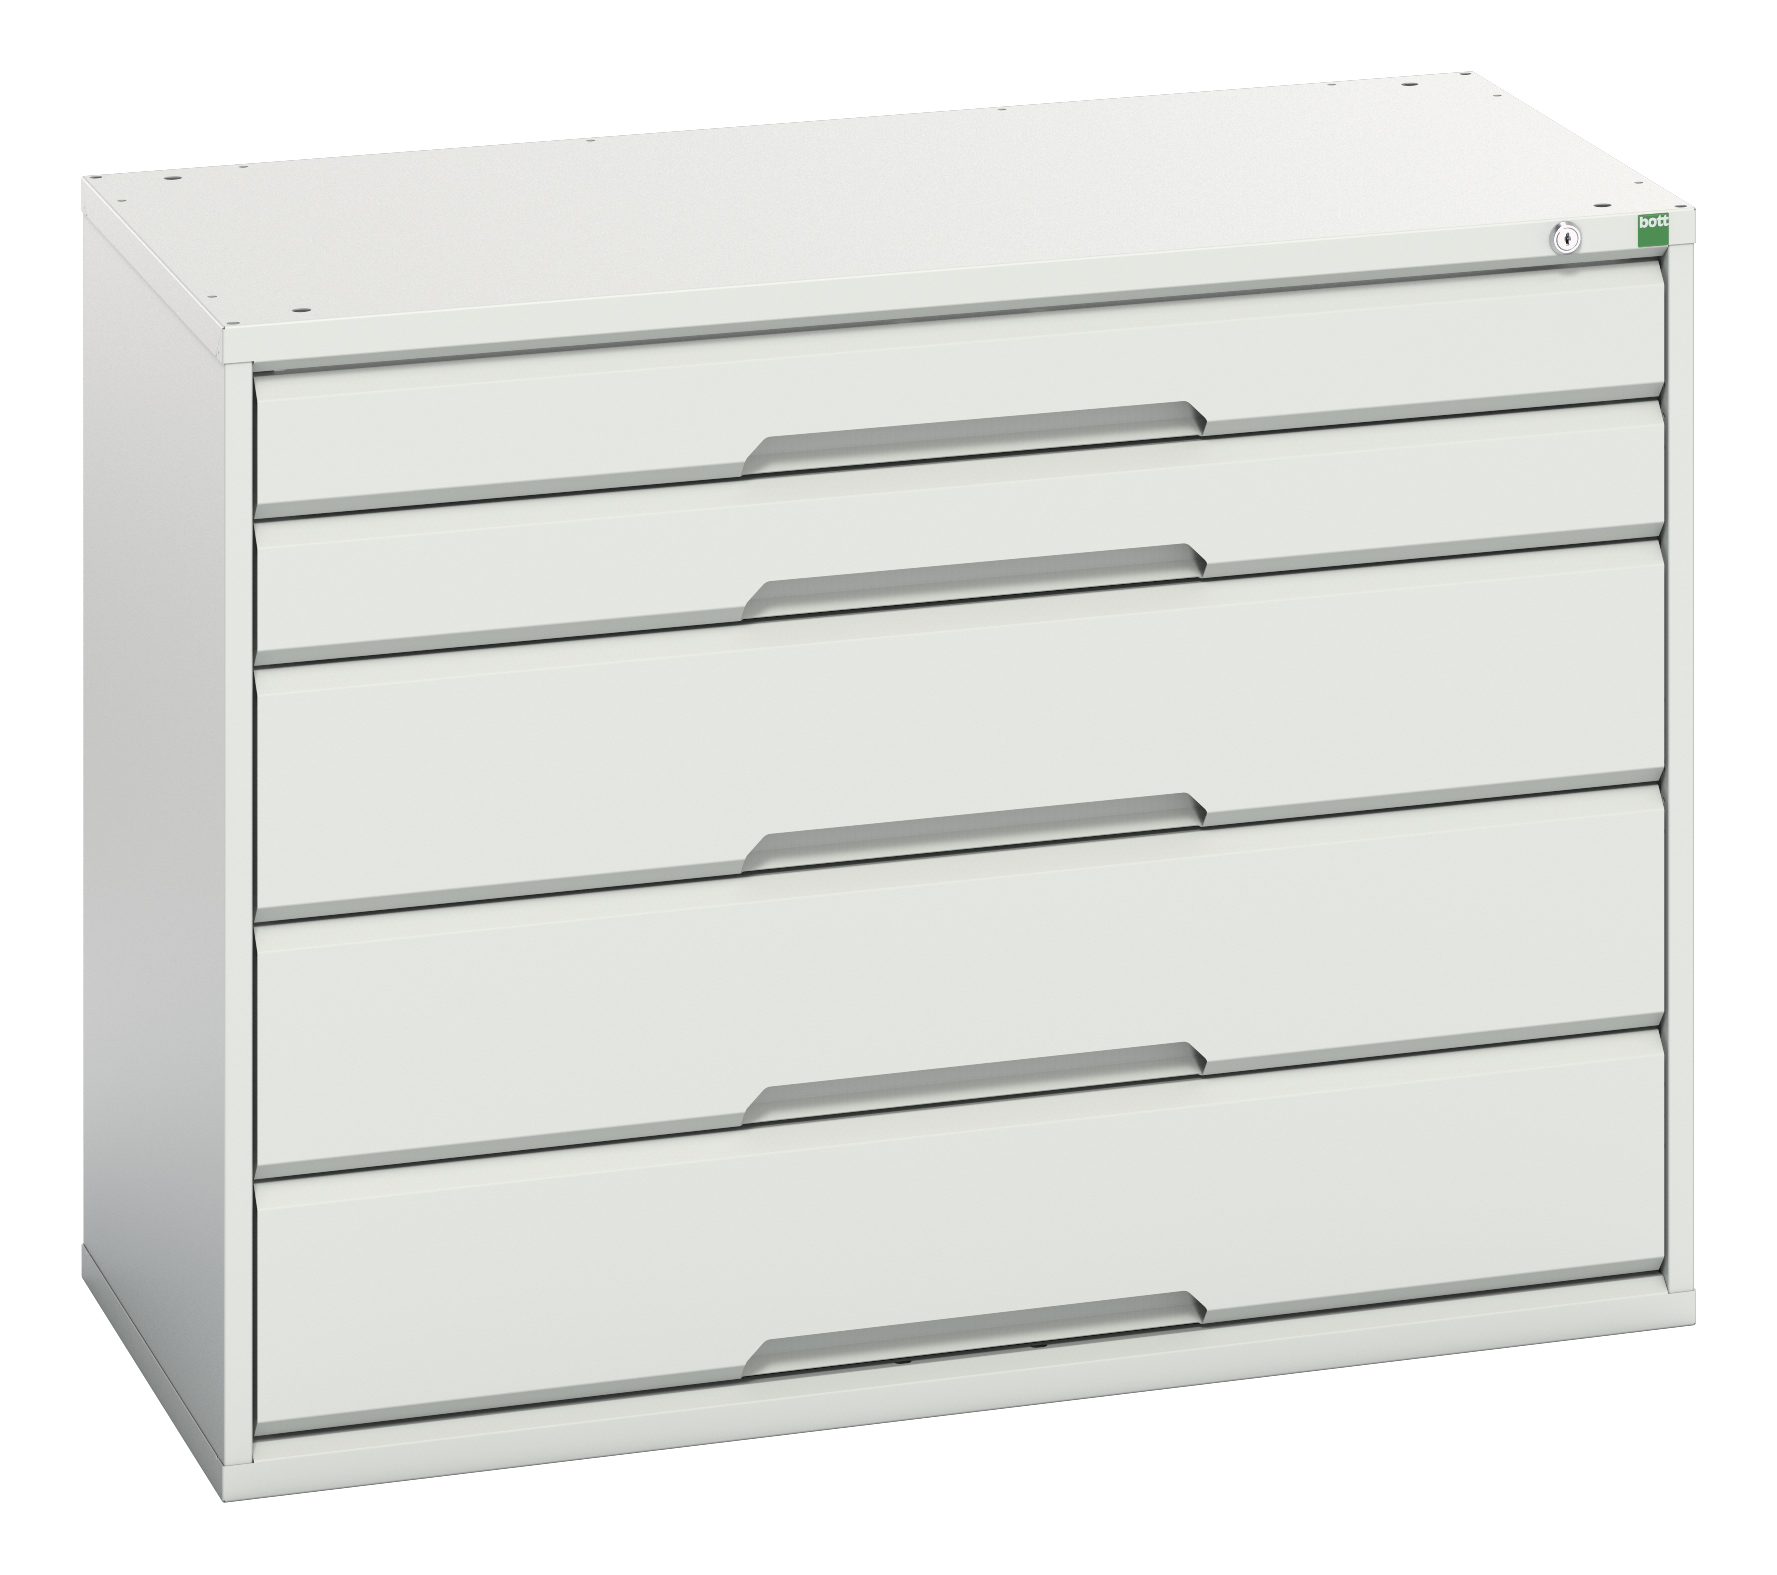 Bott Verso Drawer Cabinet With 5 Drawers - 16925212.16